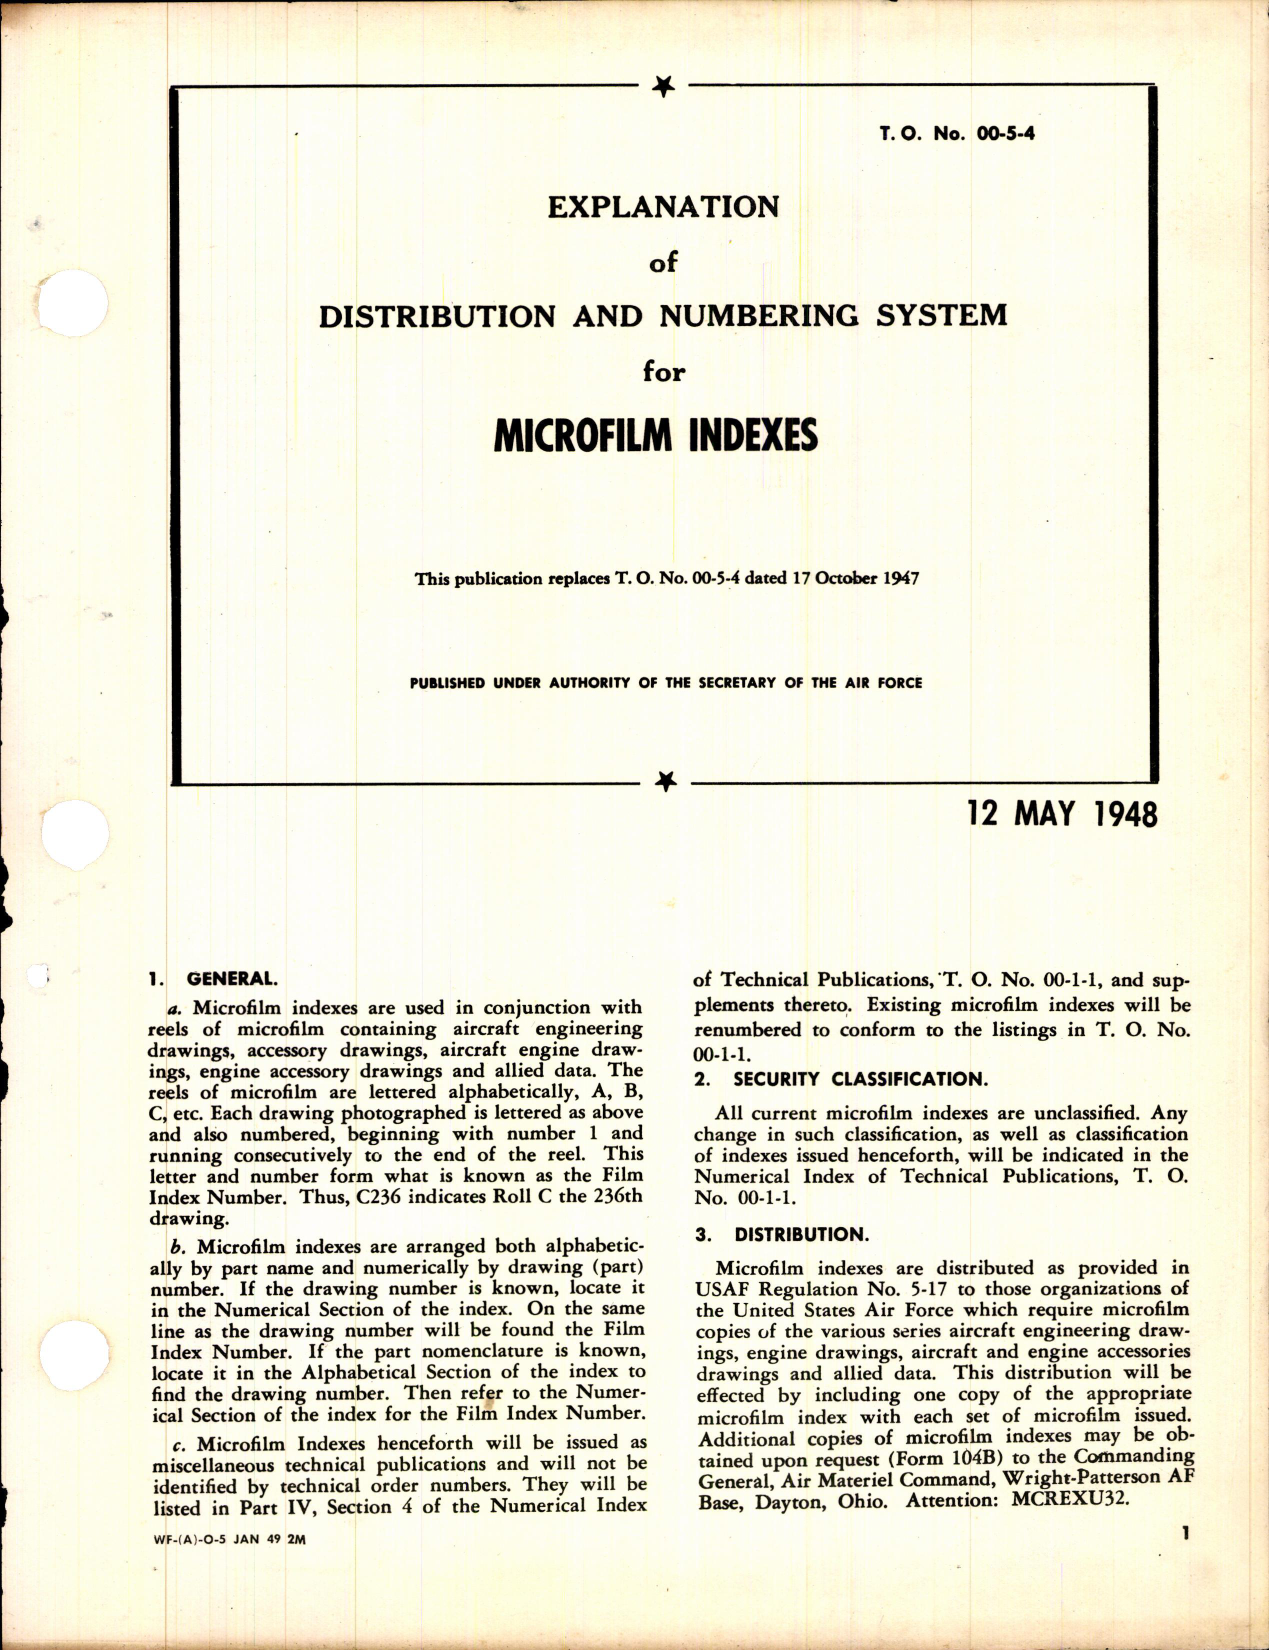 Sample page 1 from AirCorps Library document: Distribution and Numbering System for Microfilm Indexes